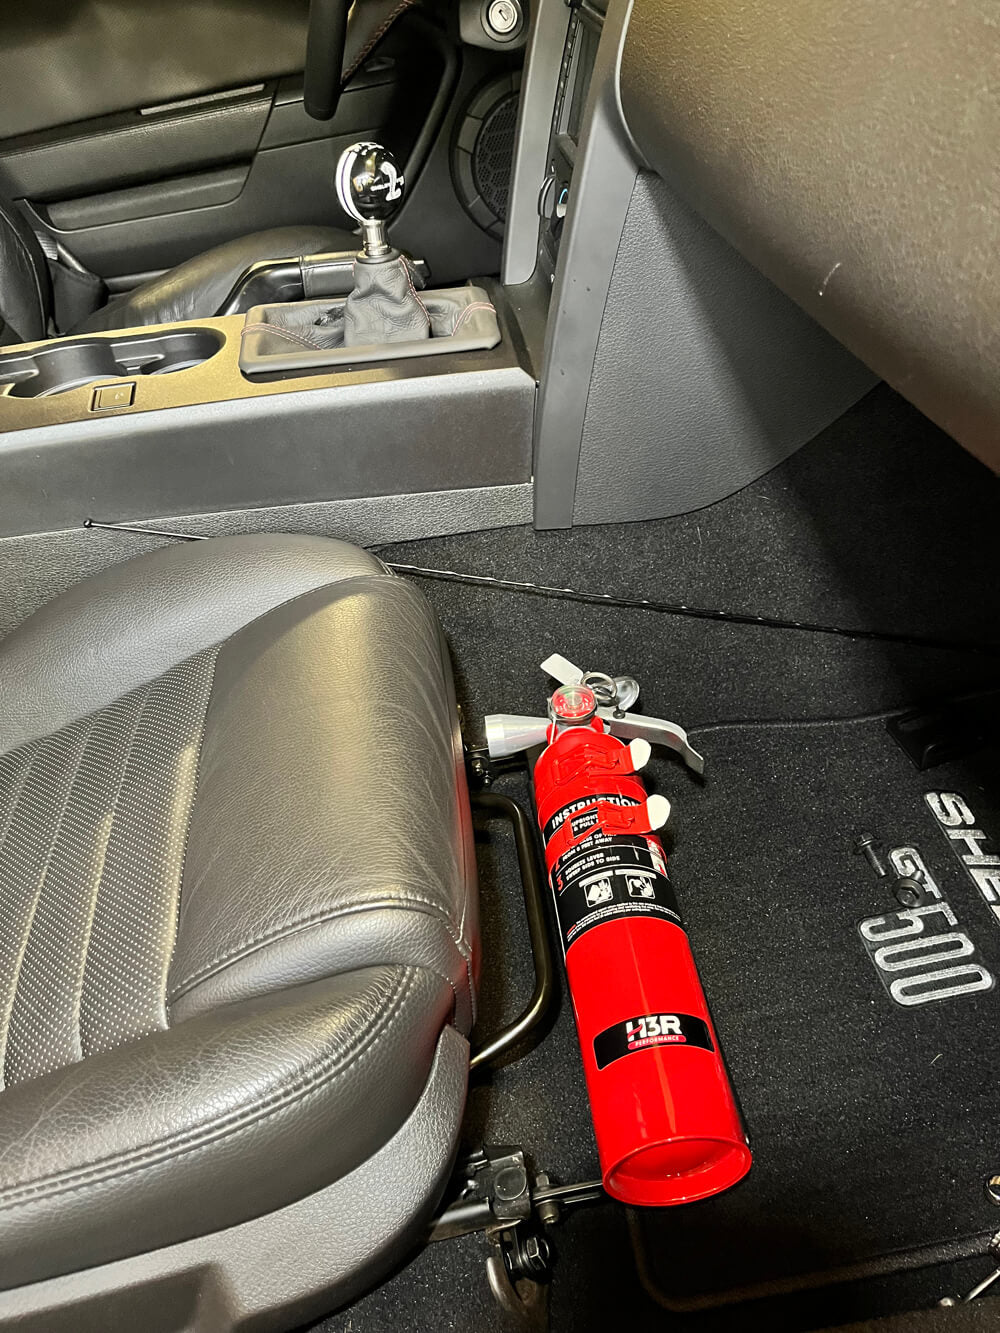 2009 Shelby GT500 Fire extinguisher installation image 1